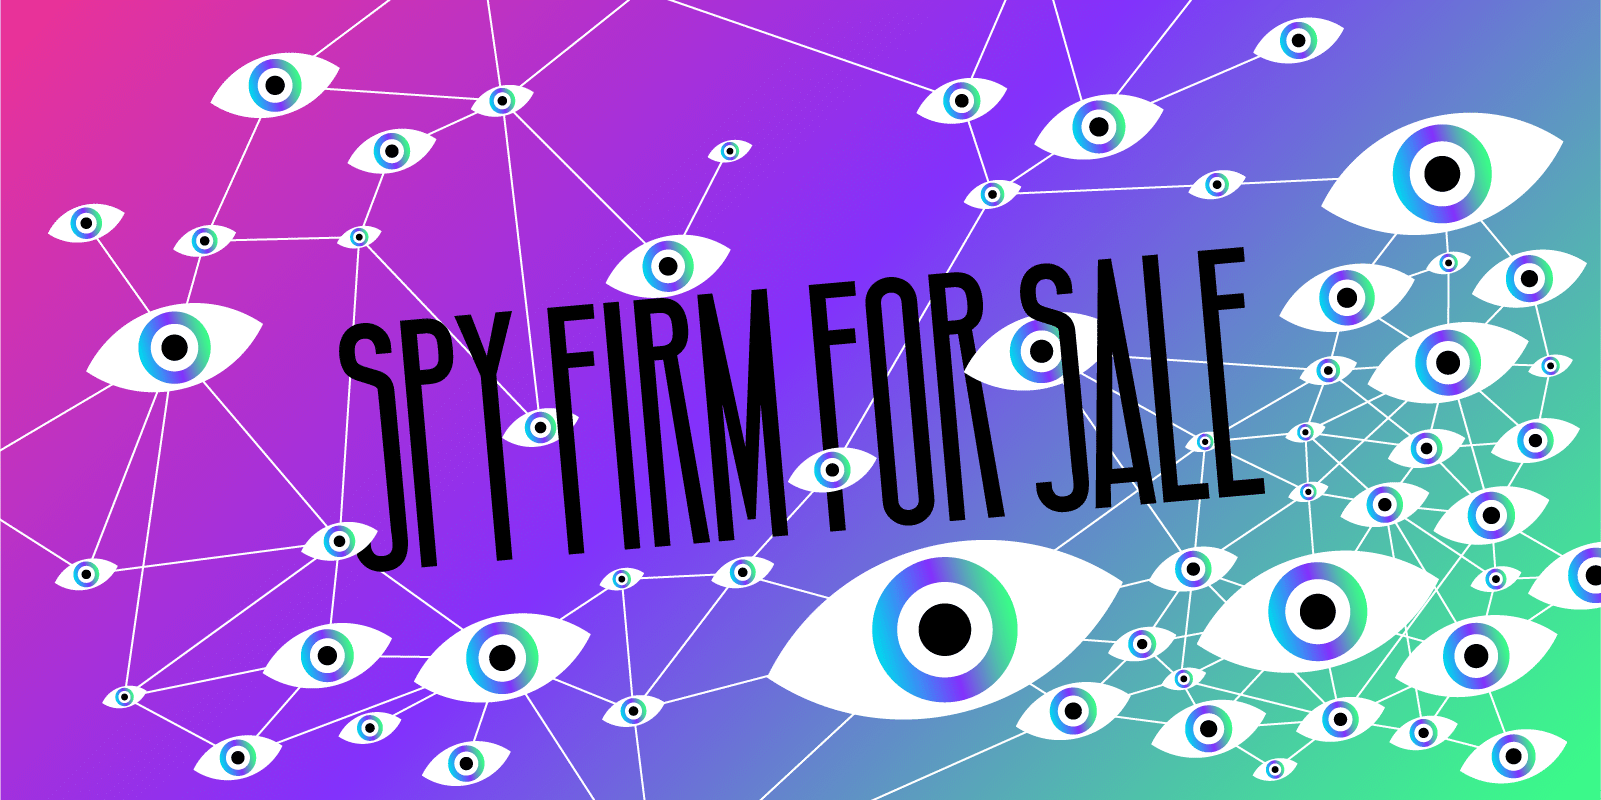 Spy firm for sale graphic